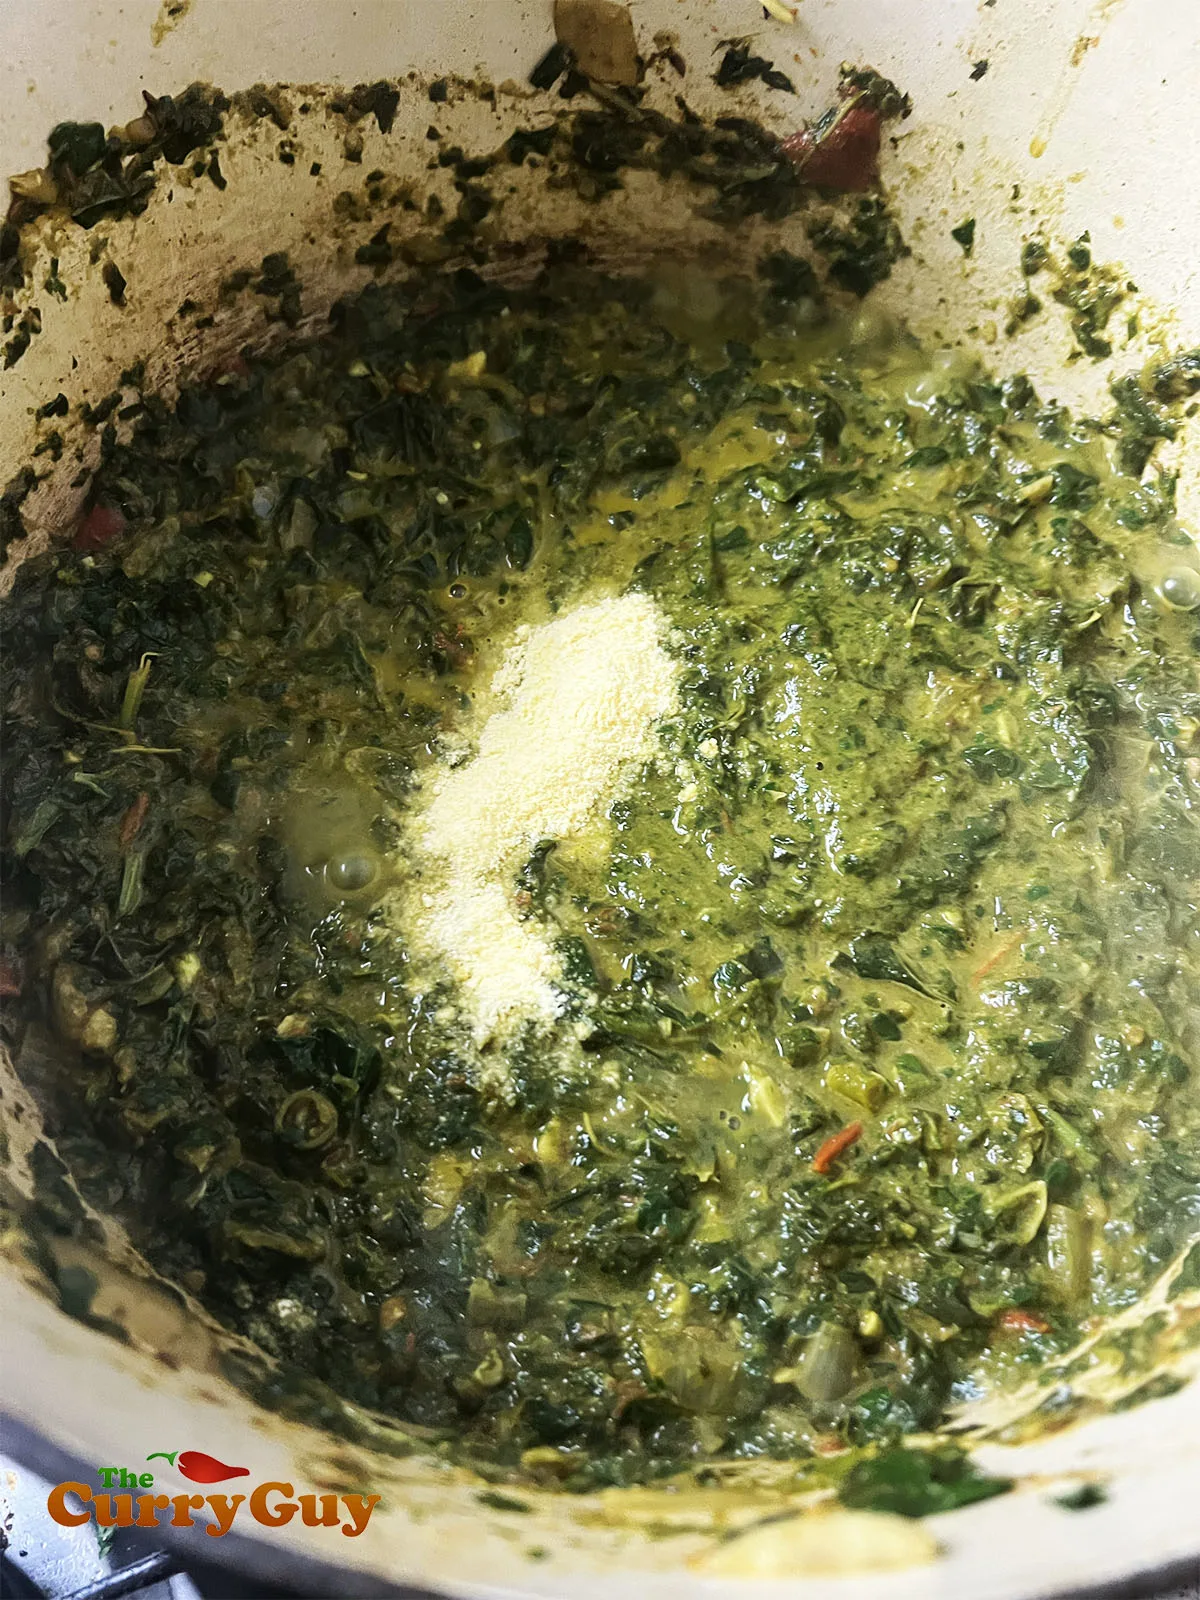 Finishing off the saag recipe by adding ghee, corn meal and salt.